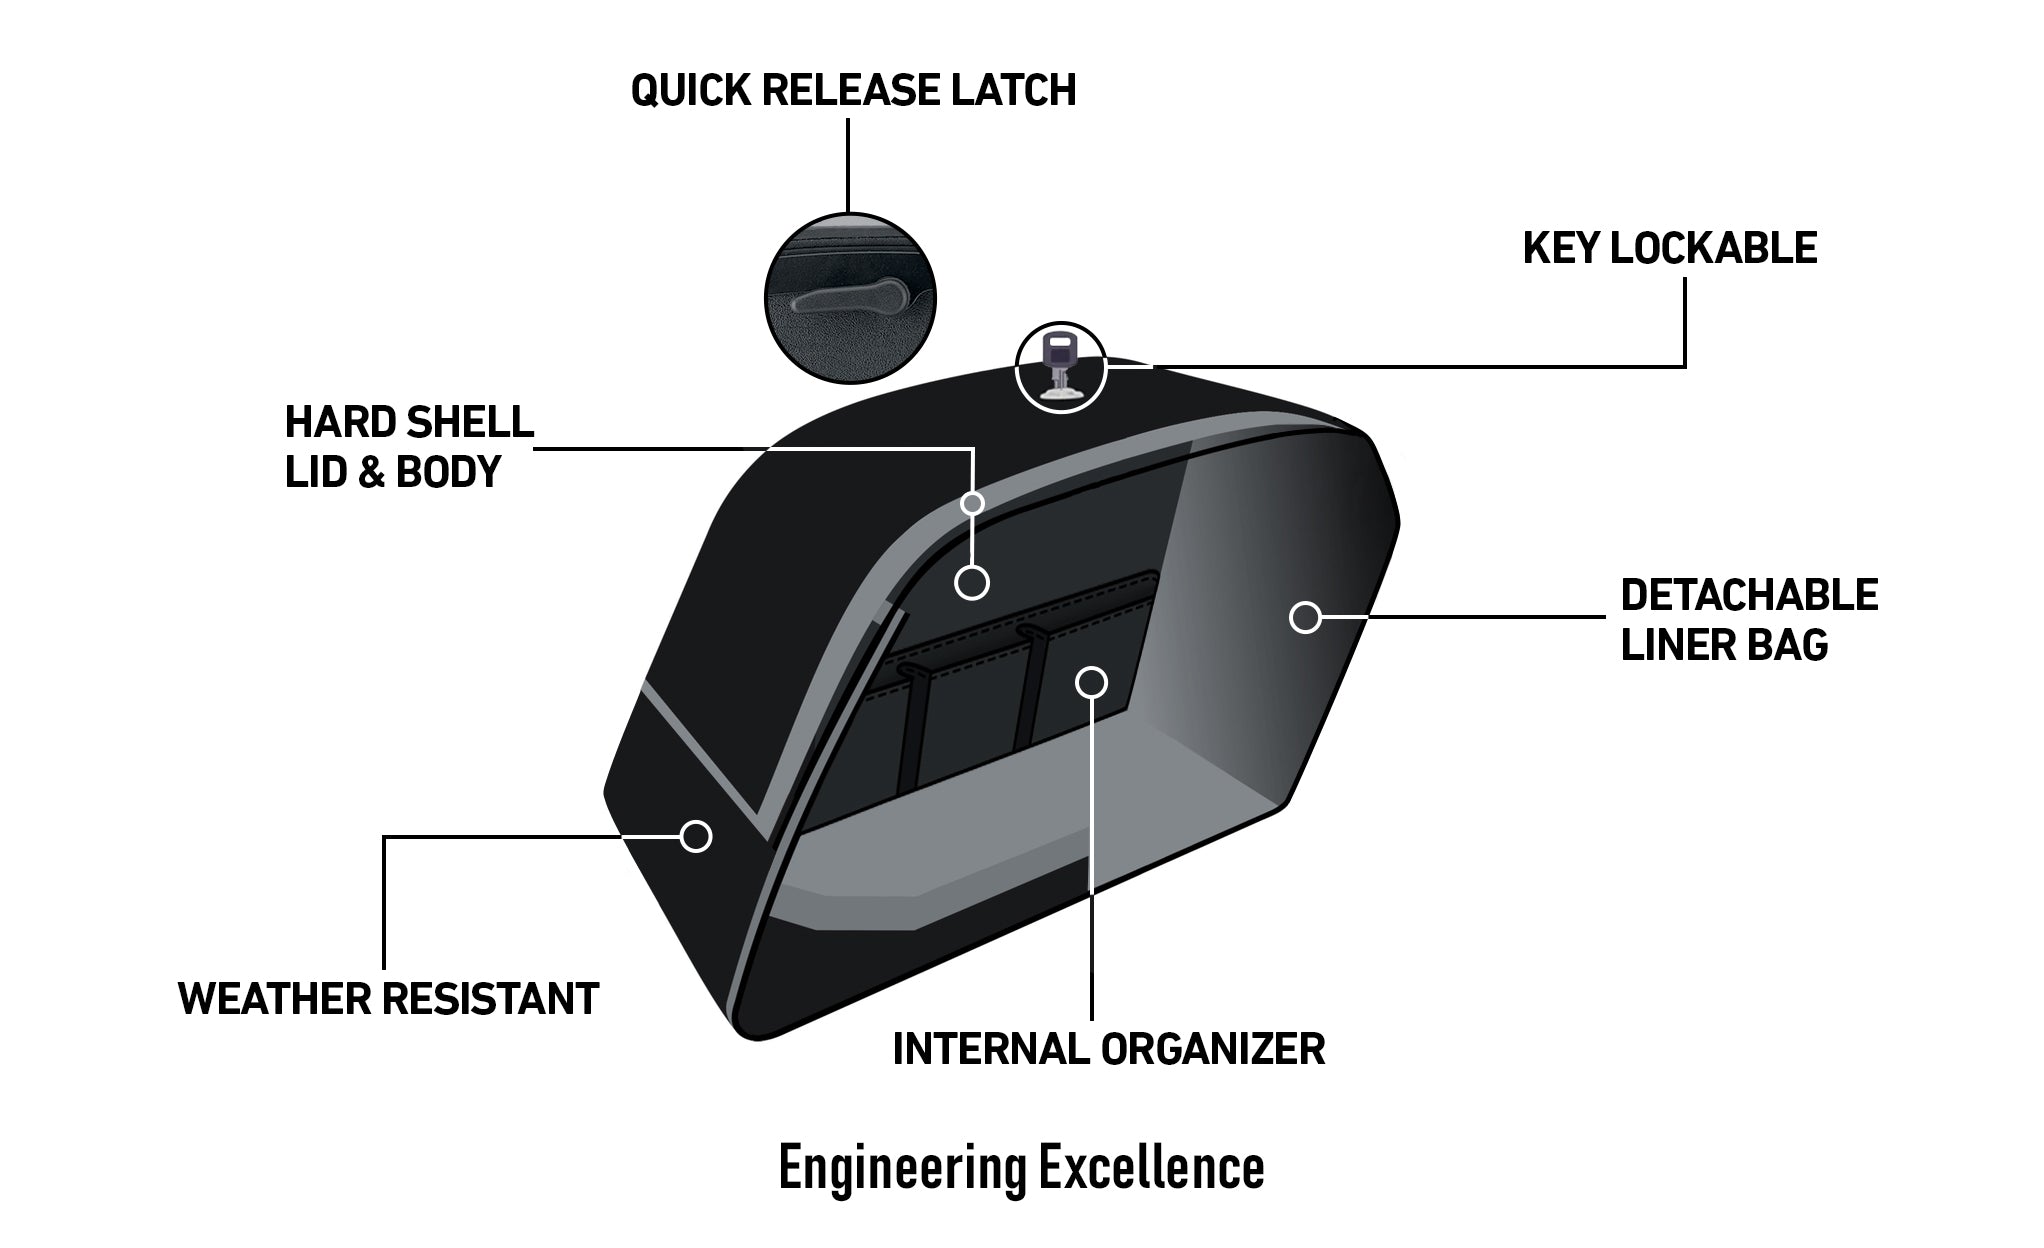 Viking Baldur Extra Large Matte Motorcycle Hard Saddlebags For Harley Softail Night Train Fxstb I Engineering Excellence with Bag on Bike @expand